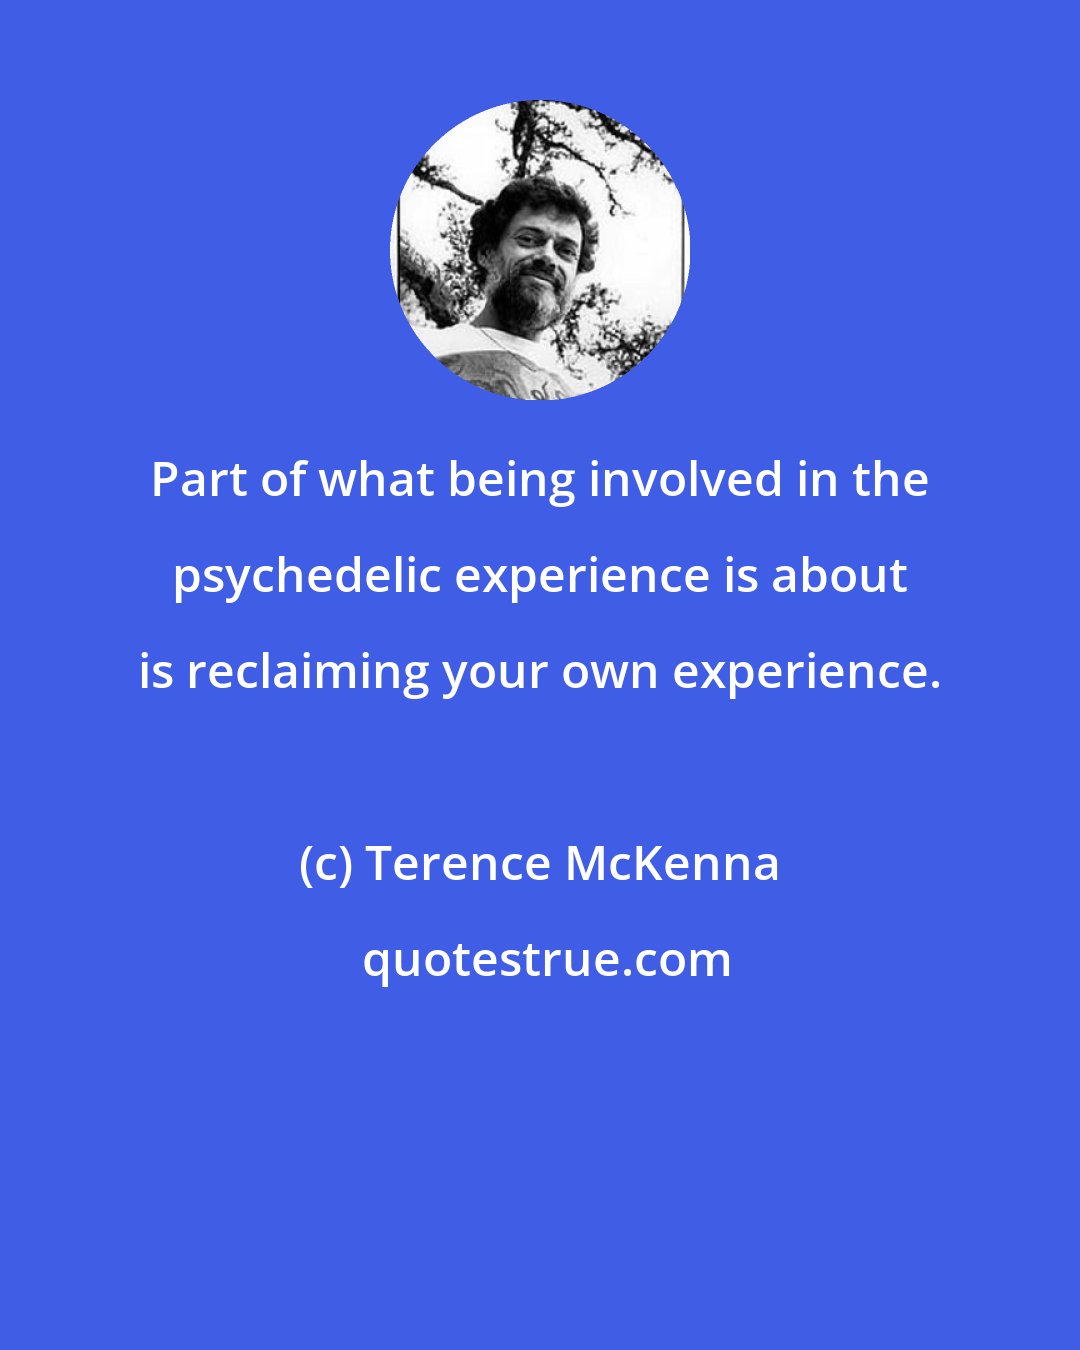 Terence McKenna: Part of what being involved in the psychedelic experience is about is reclaiming your own experience.